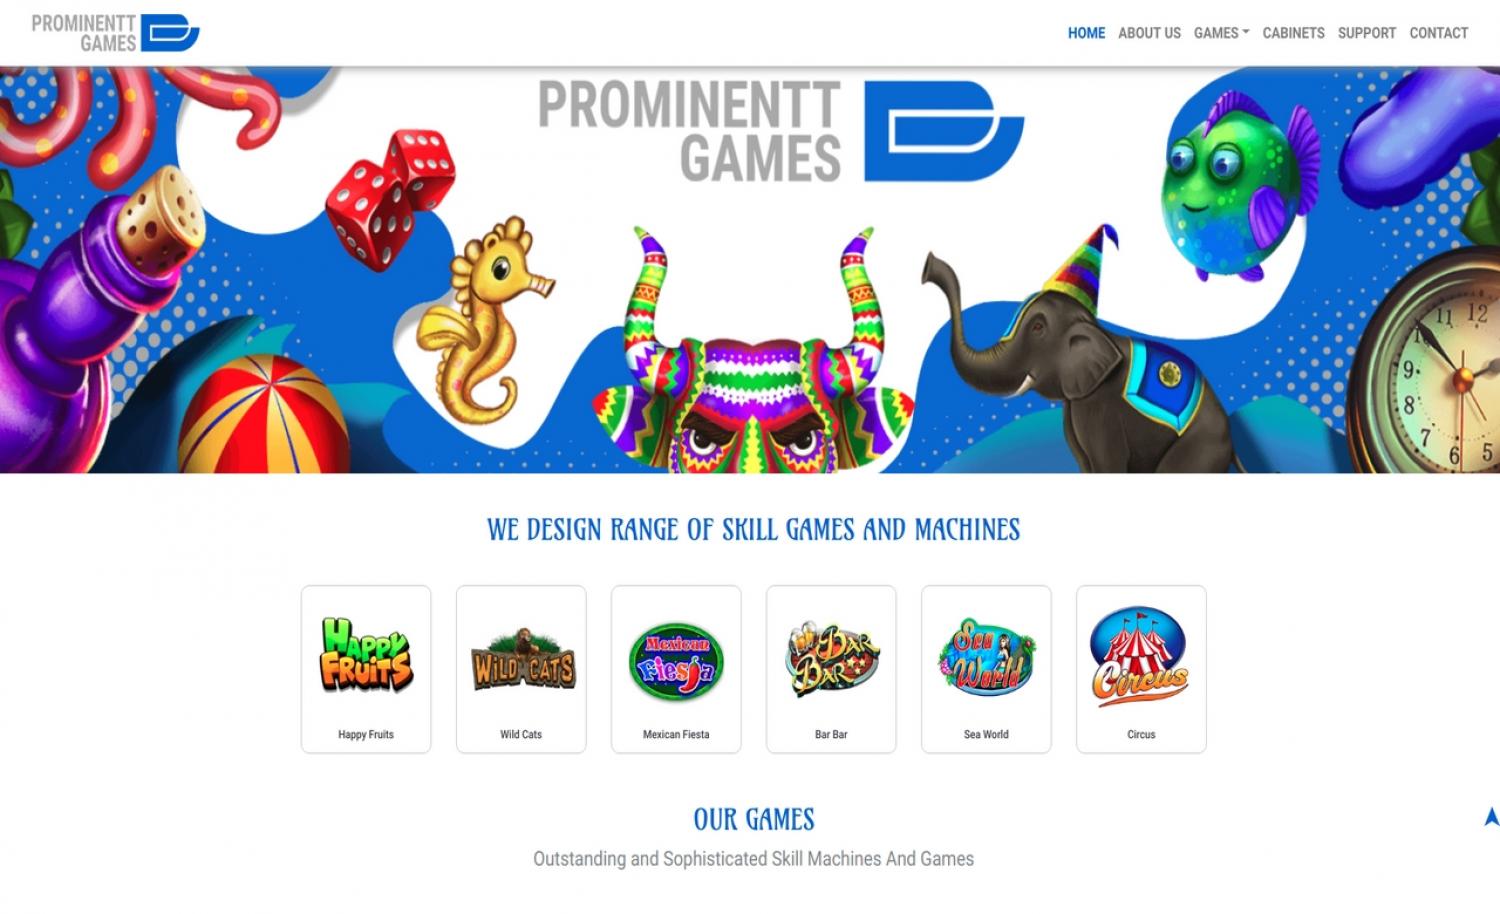 Prominentt Games  cover photo